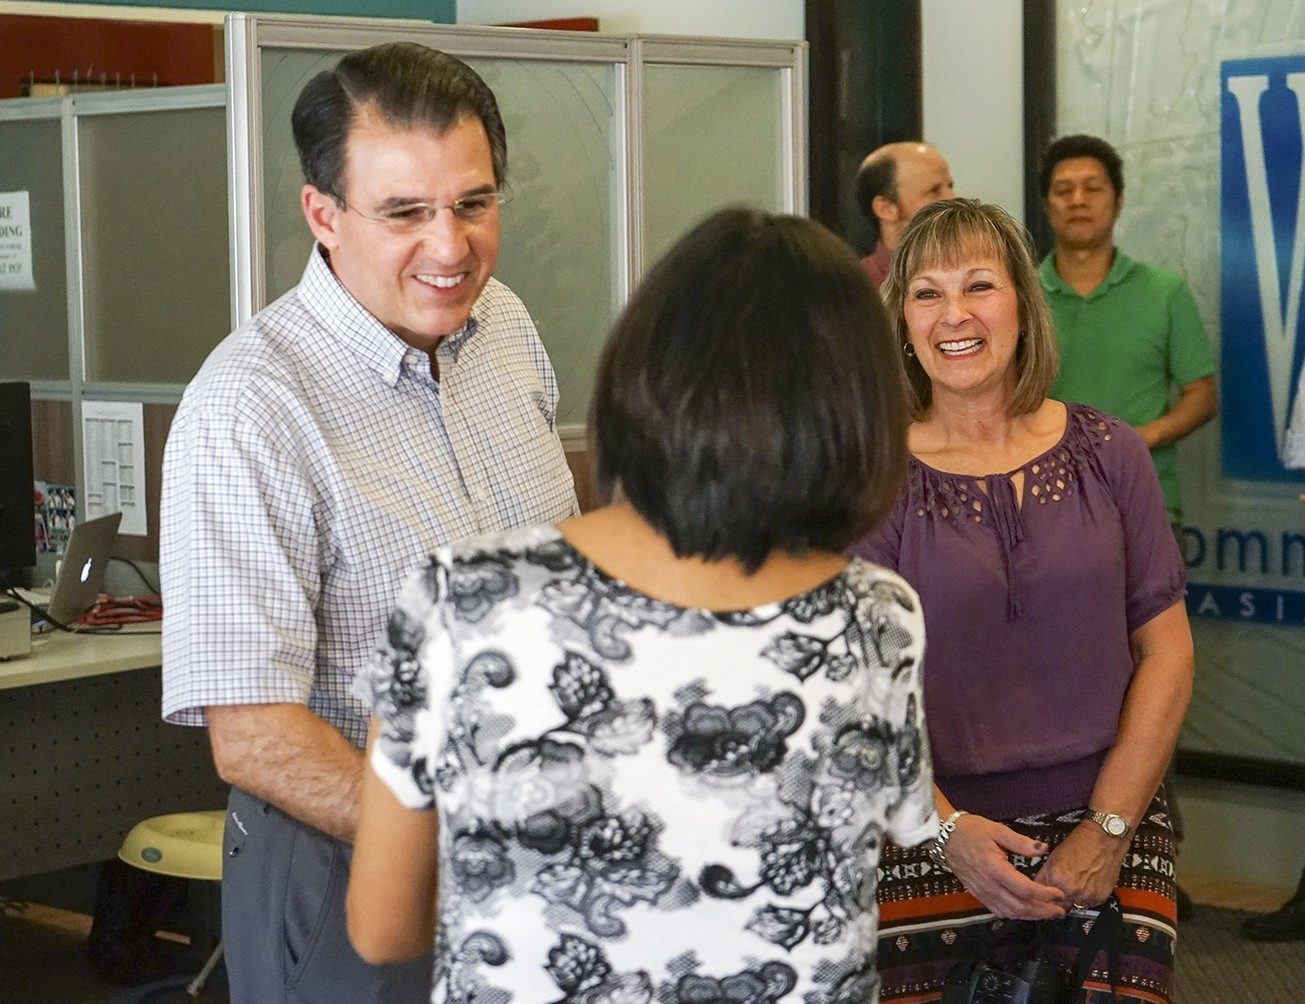 David and Sharon Graves meet staff at the World Mission Communications Center in Manila, Philippines.